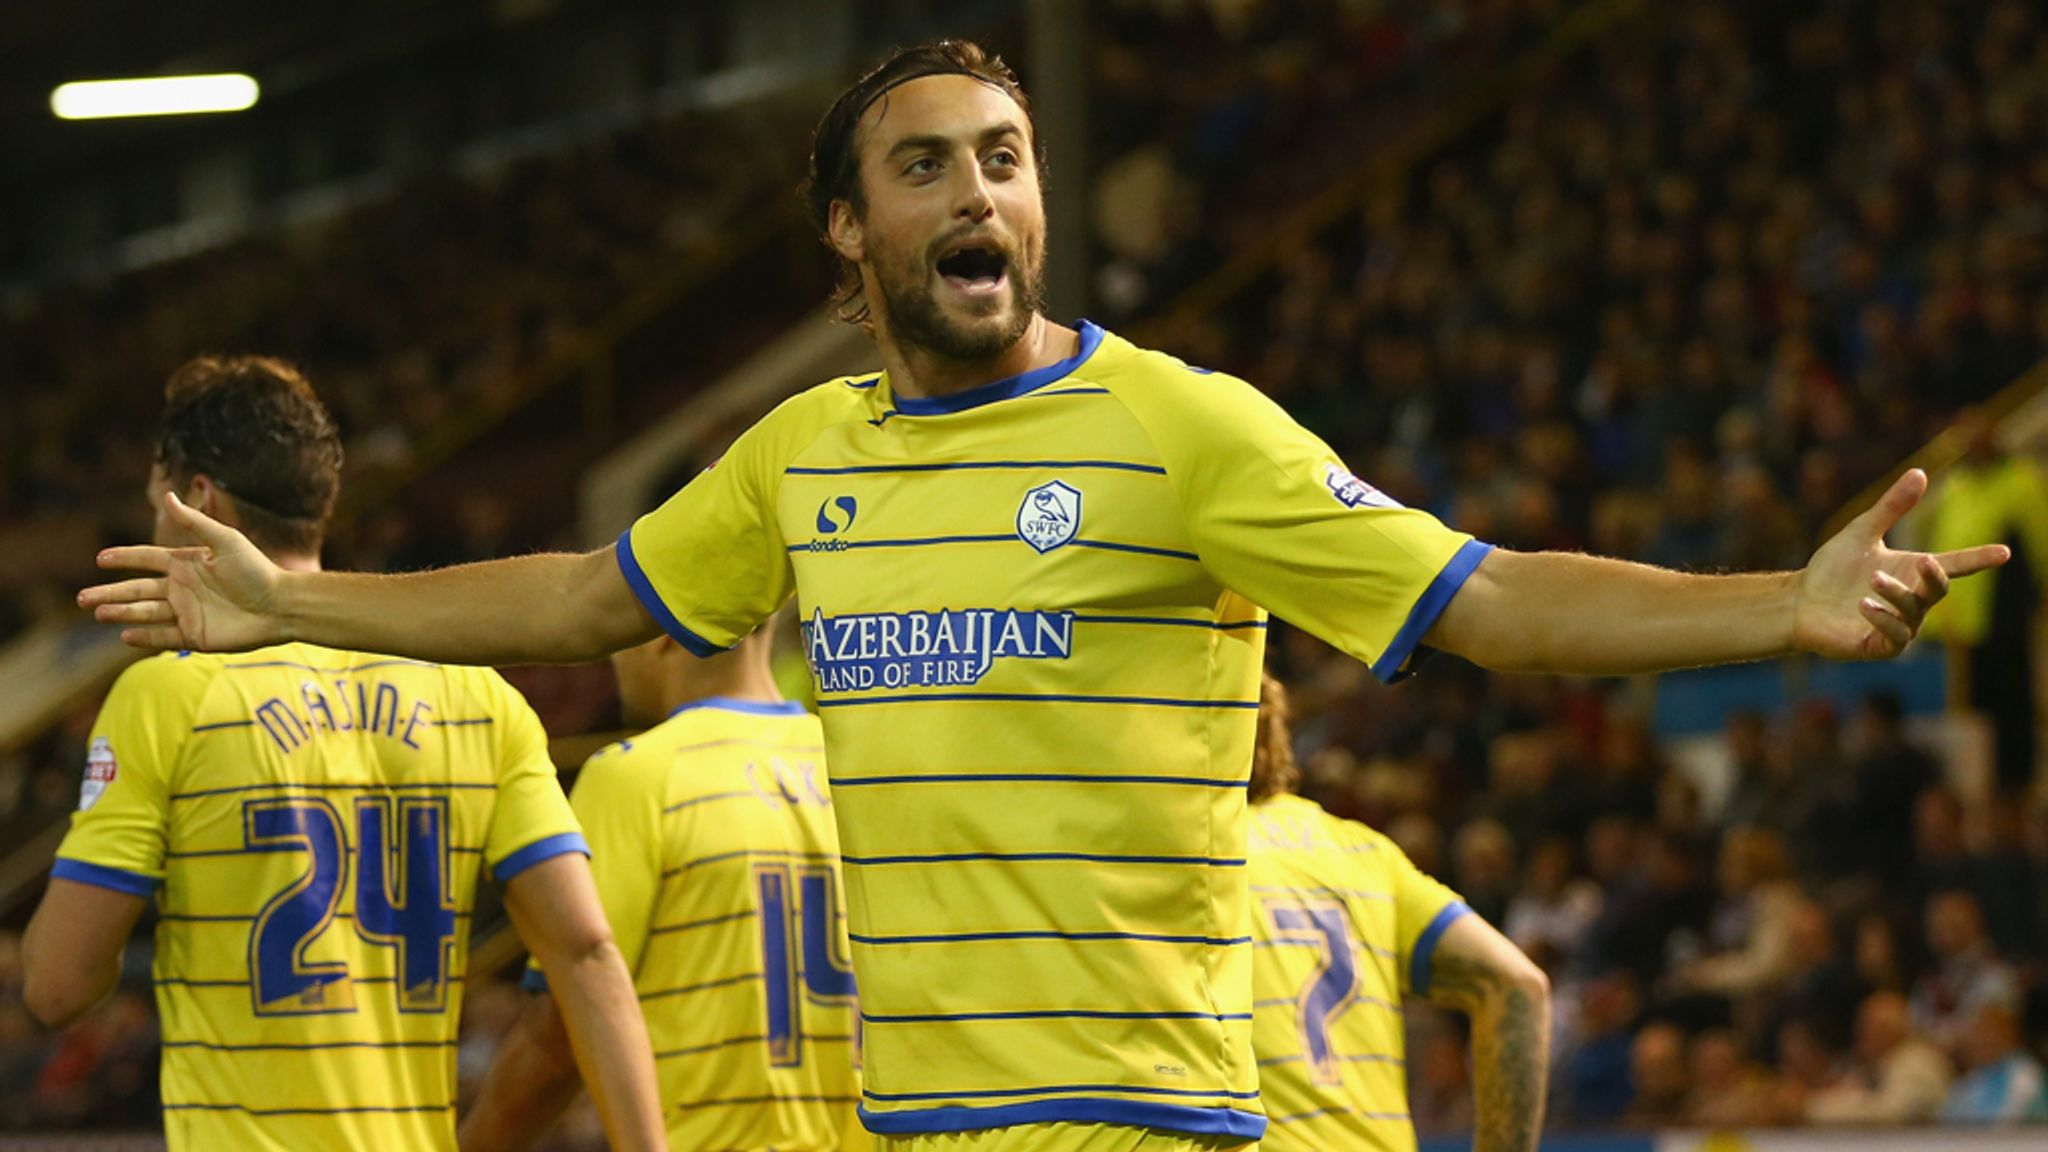 Sky Bet Championship Sheffield Wednesday edge to 2-0 win over Middlesbrough Football News Sky Sports